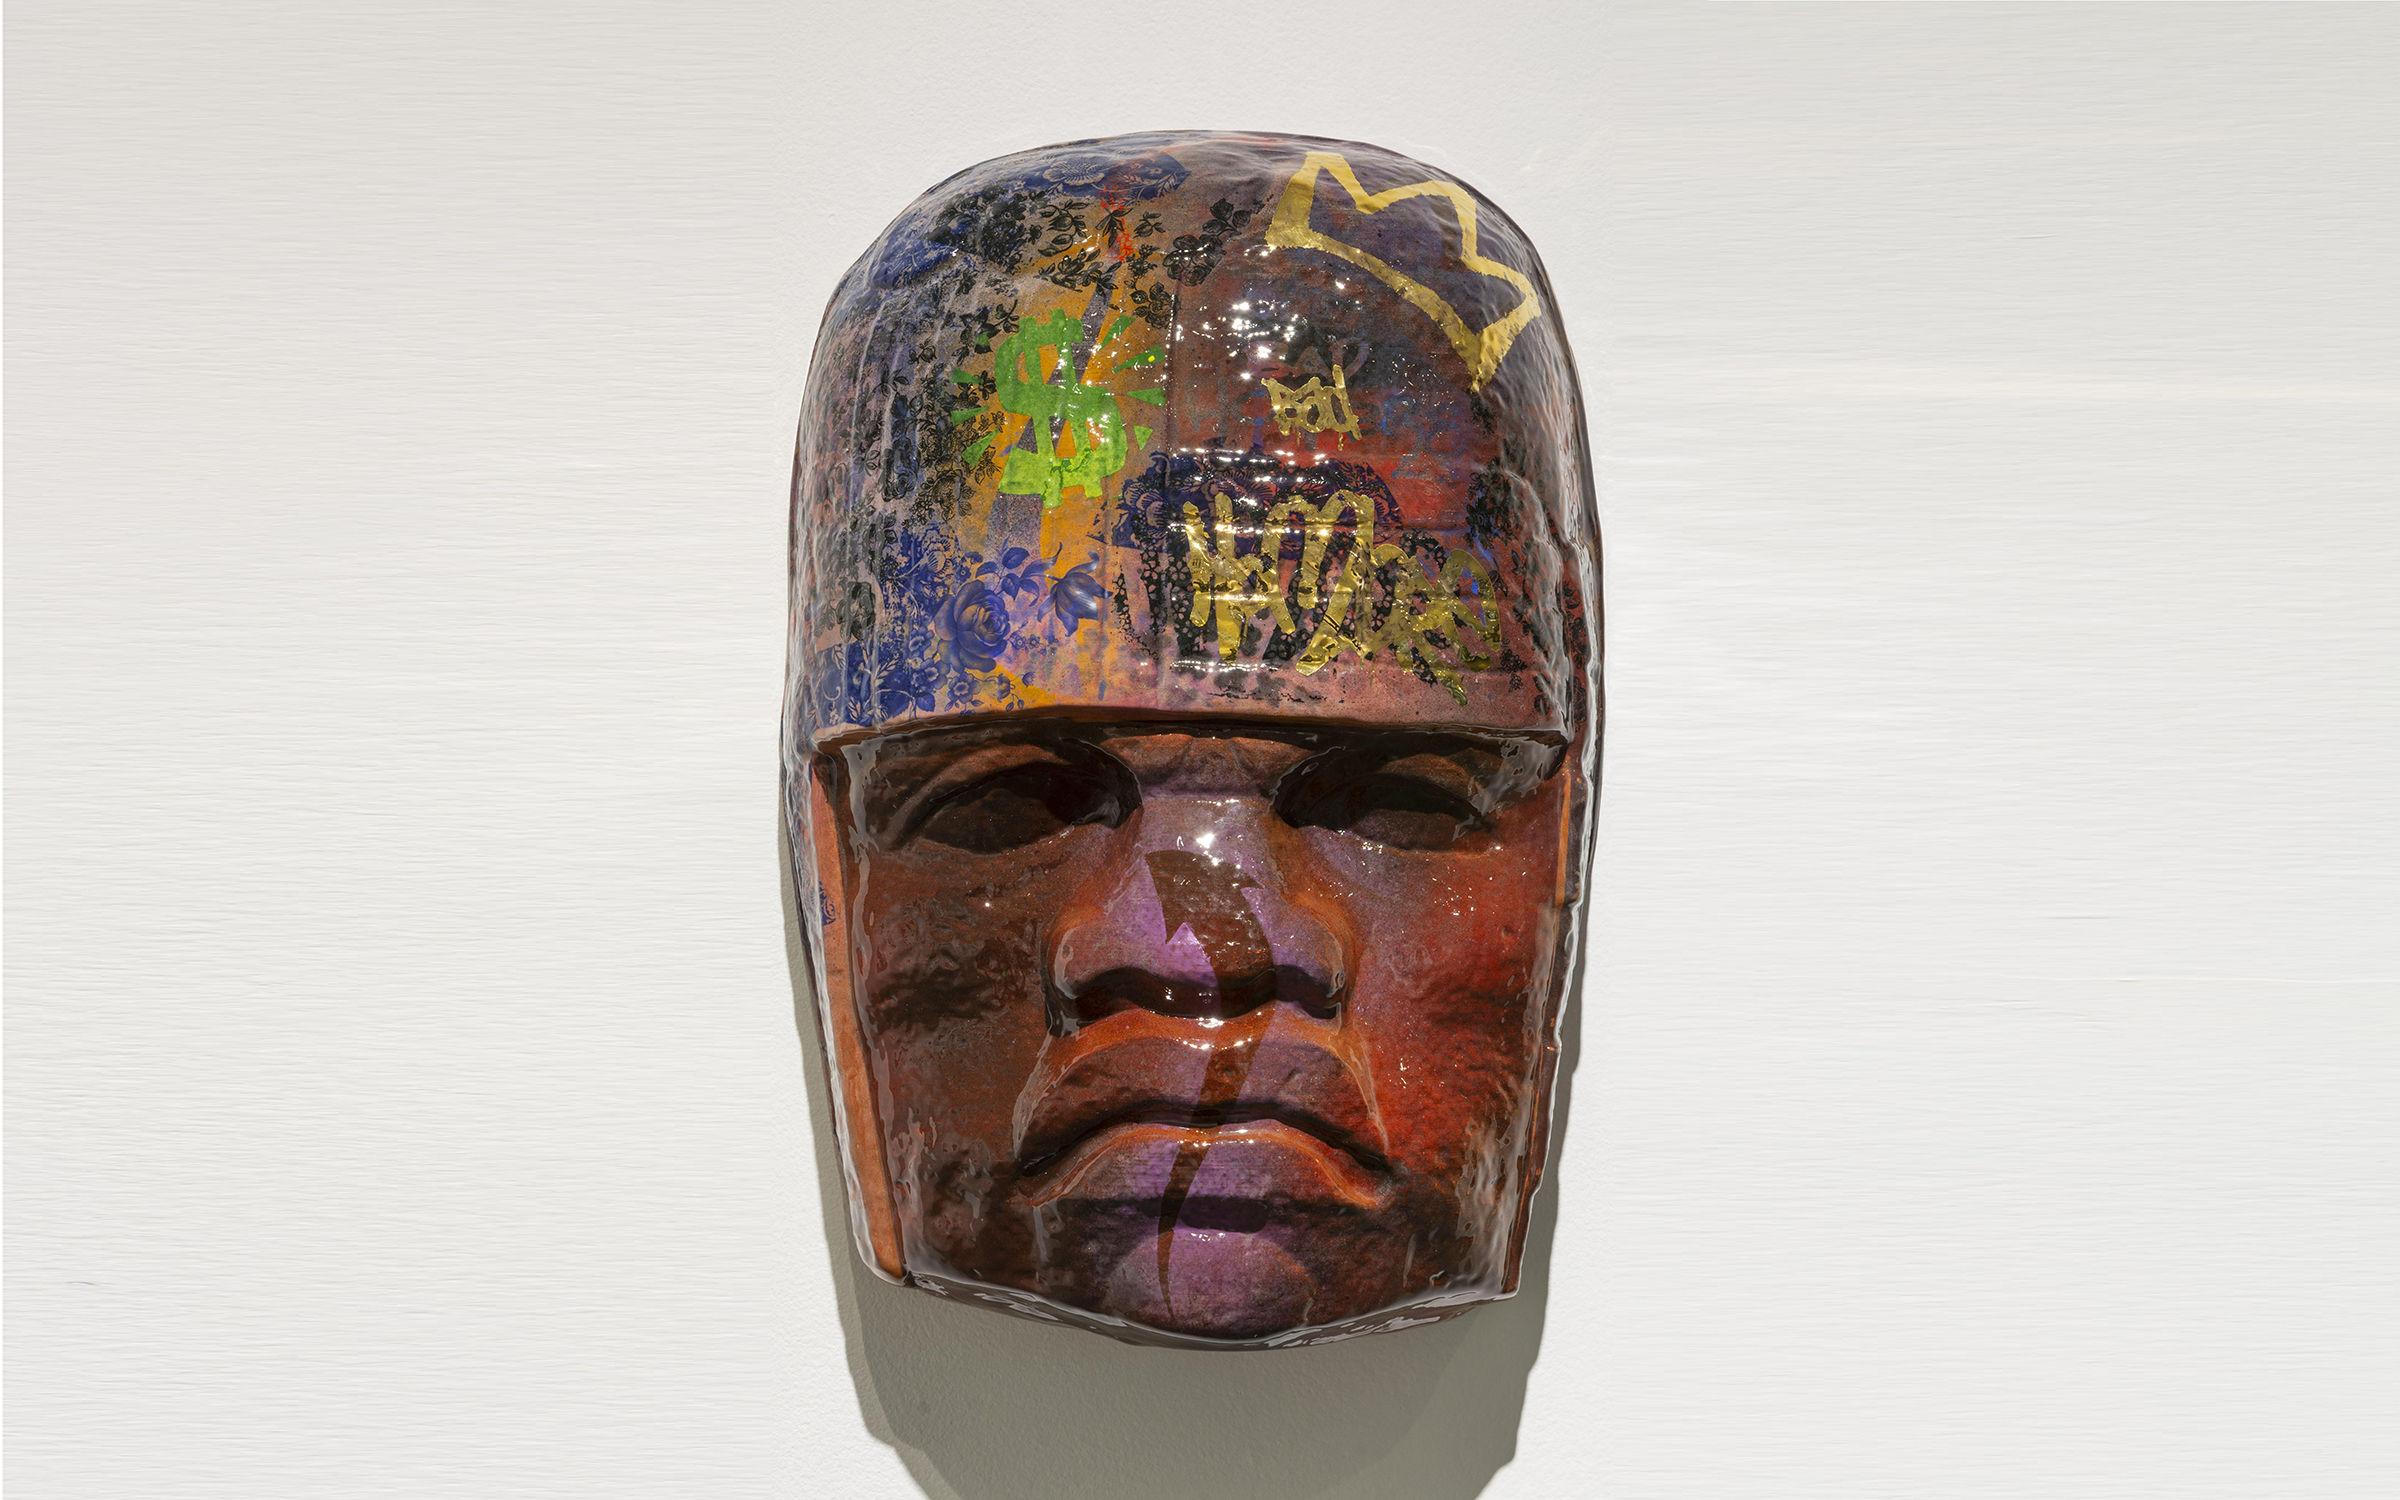 A brown ceramic mask in the style of ancient Meso-American art covered in modern-day graffiti 